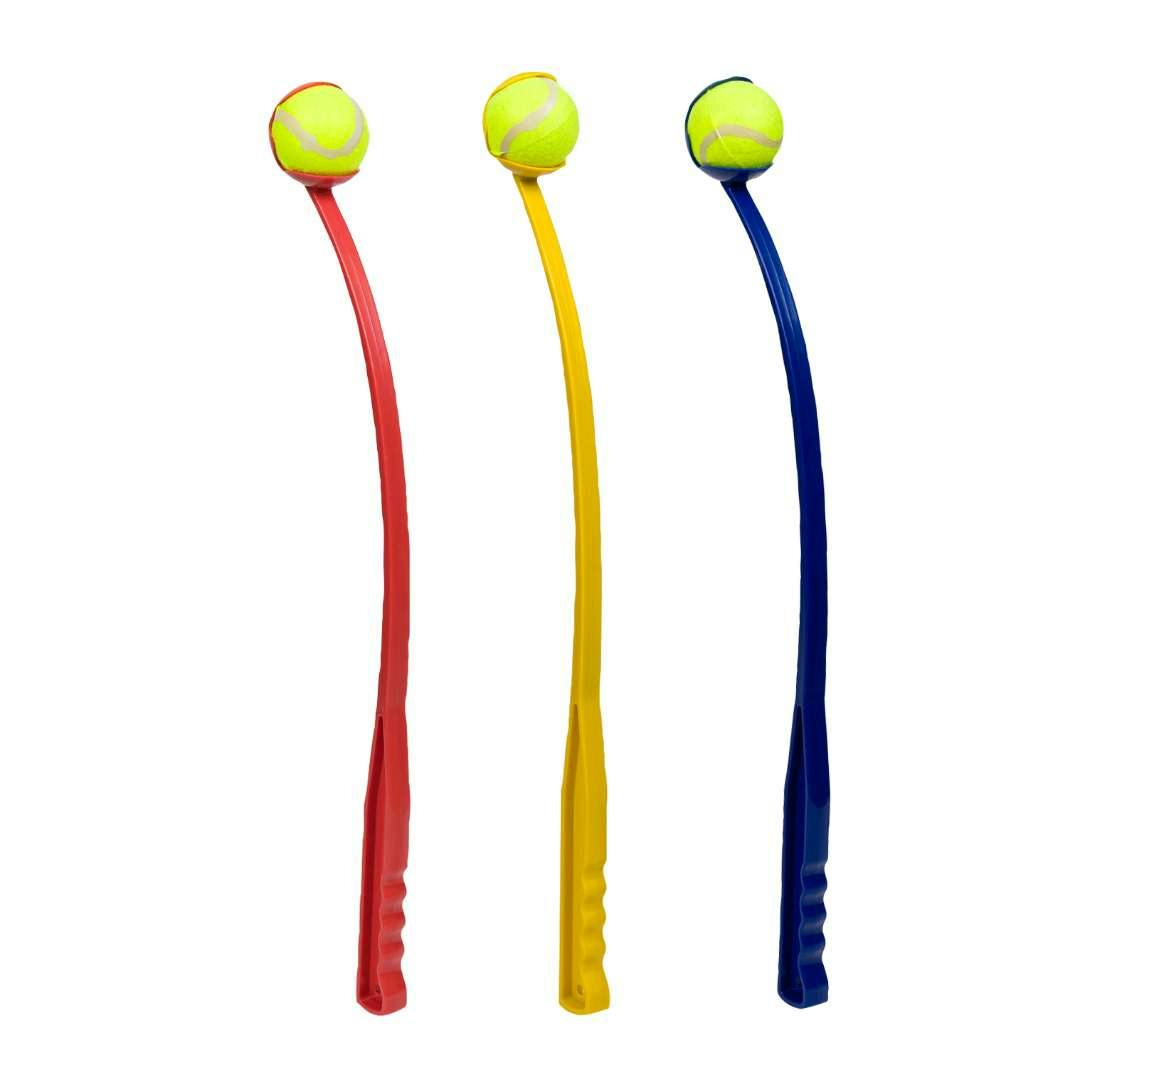 Ball Launcher Dog Toys - Assorted Colors, 25.6"